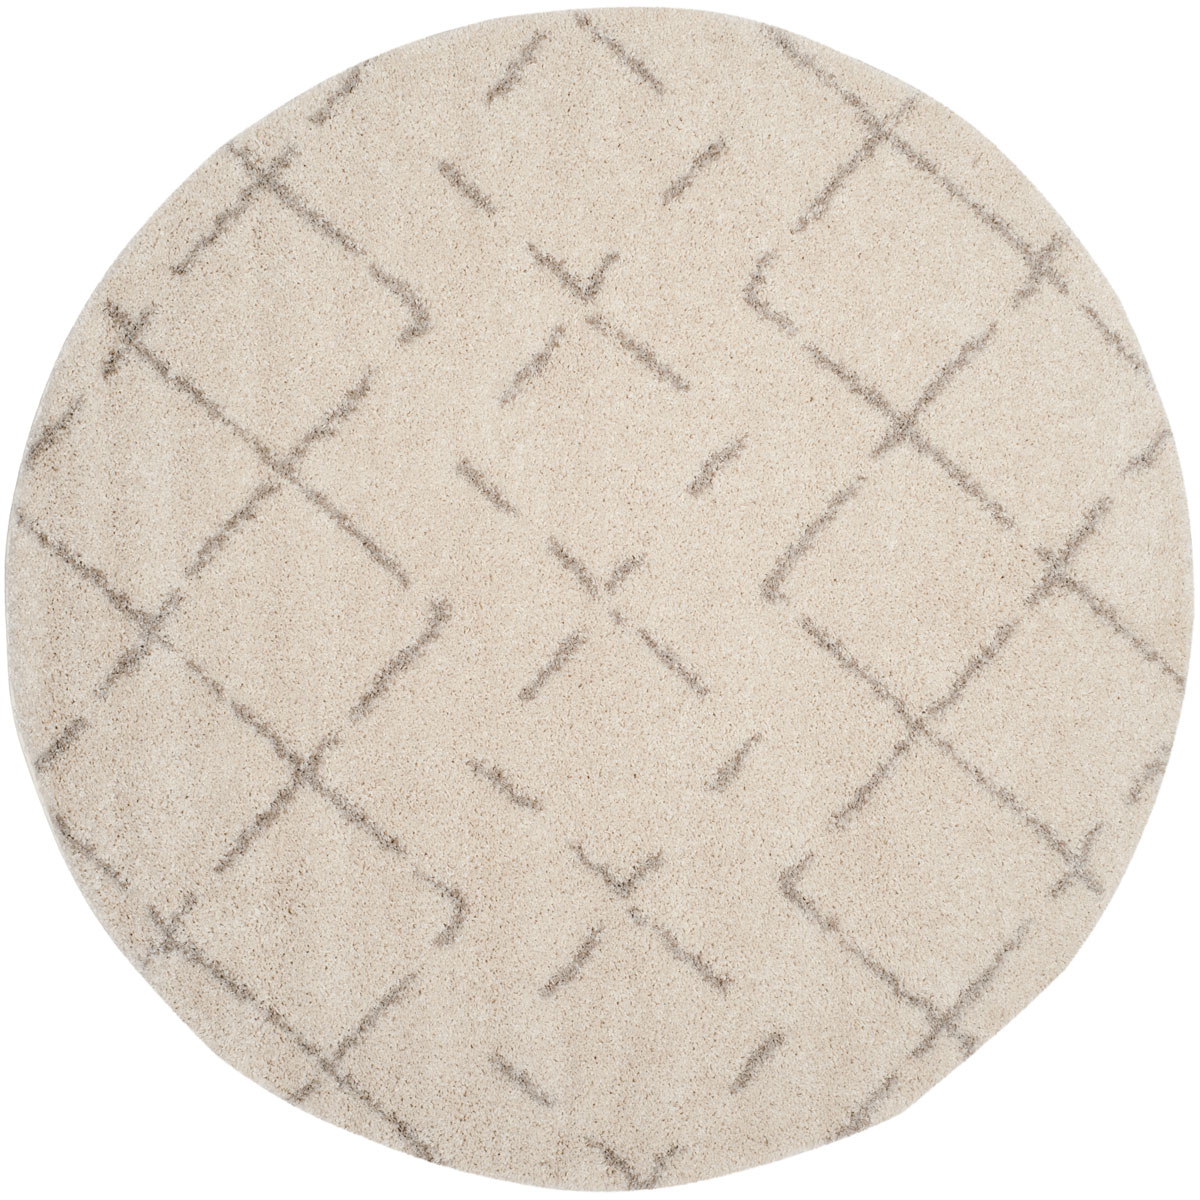 Asg743a-7r Arizona Shag Power Loomed Round Area Rug, Ivory & Beige - 6 Ft.-7 In. X 6 Ft.-7 In.